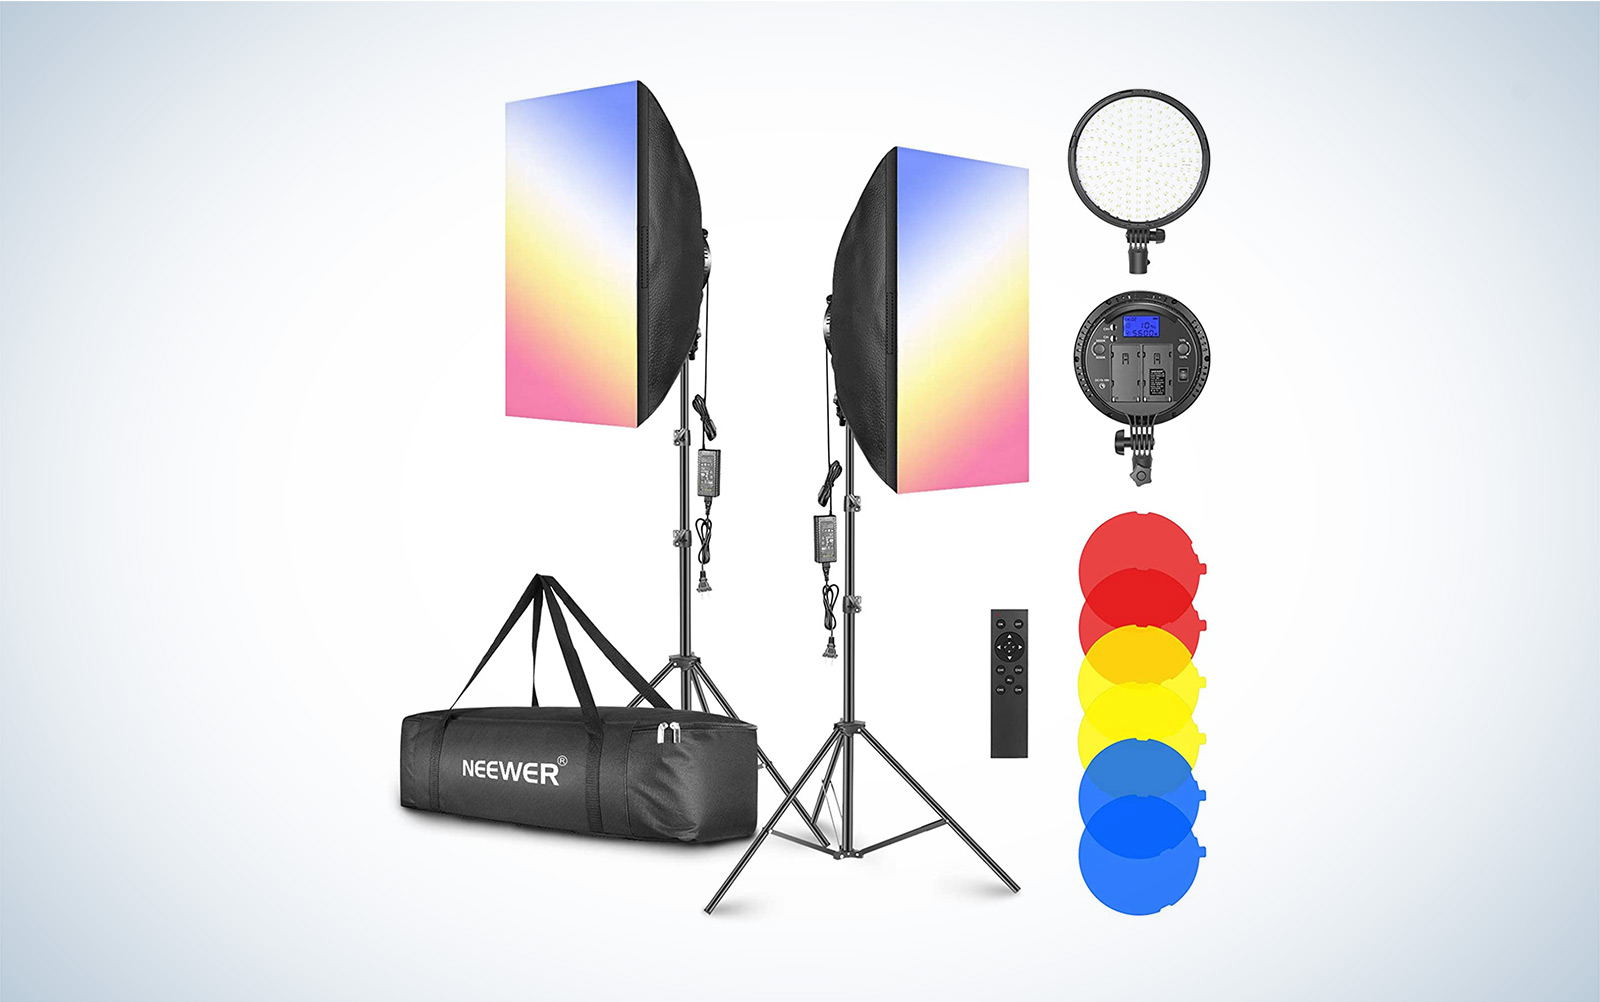 NEEWER 2 x 3M/7 x10FT Background Support System - NEEWER